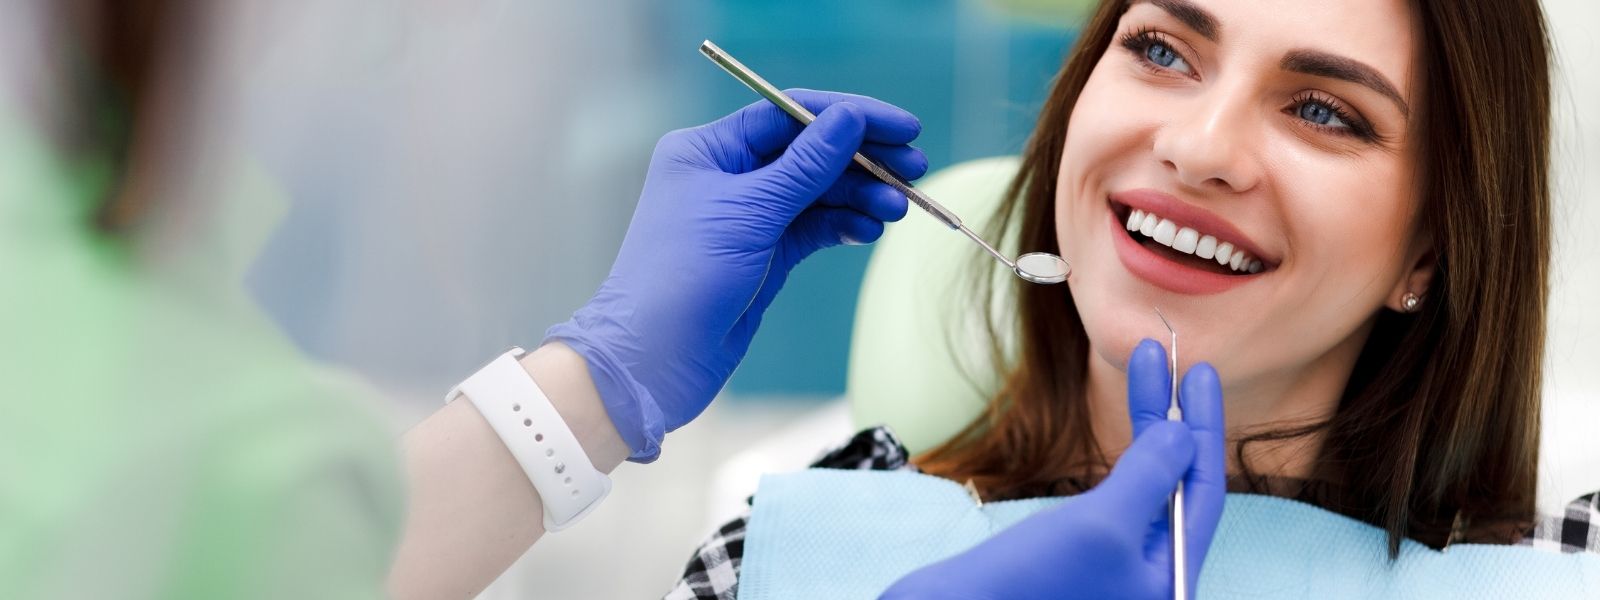 Girl with brown hair getting a Dental Filling